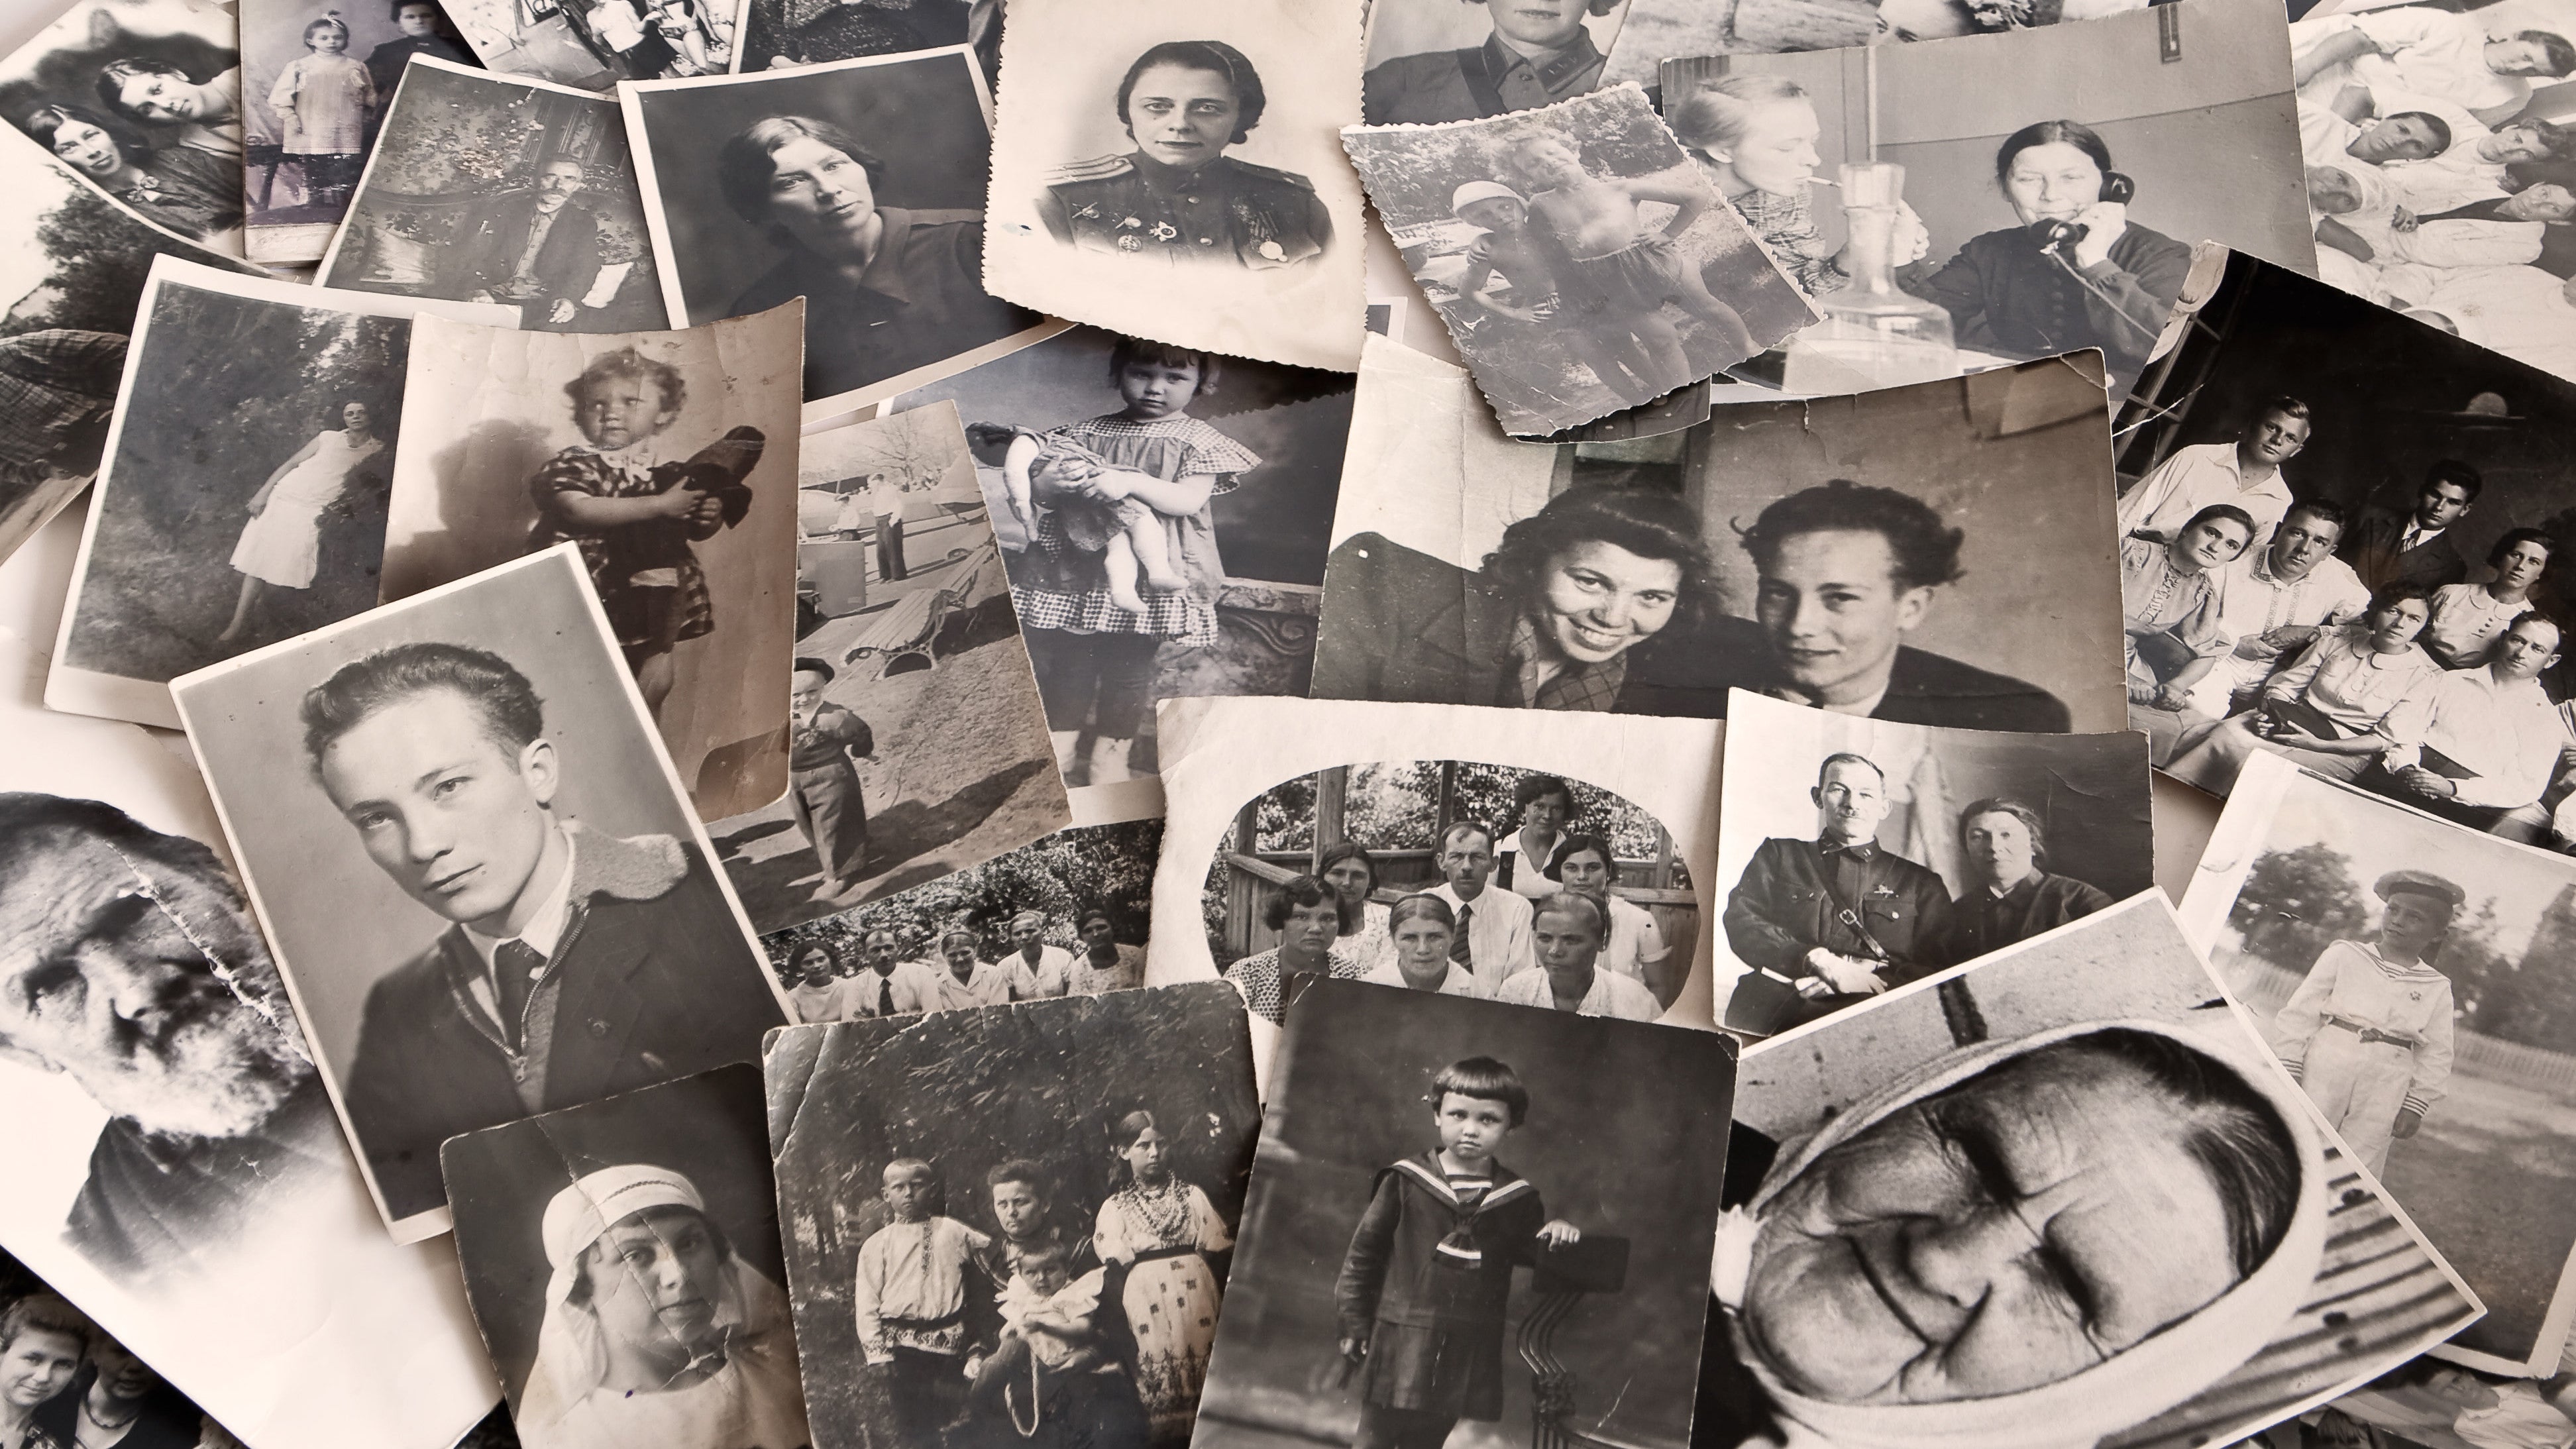 Work On Your Family Tree With These Free Online Genealogy Resources